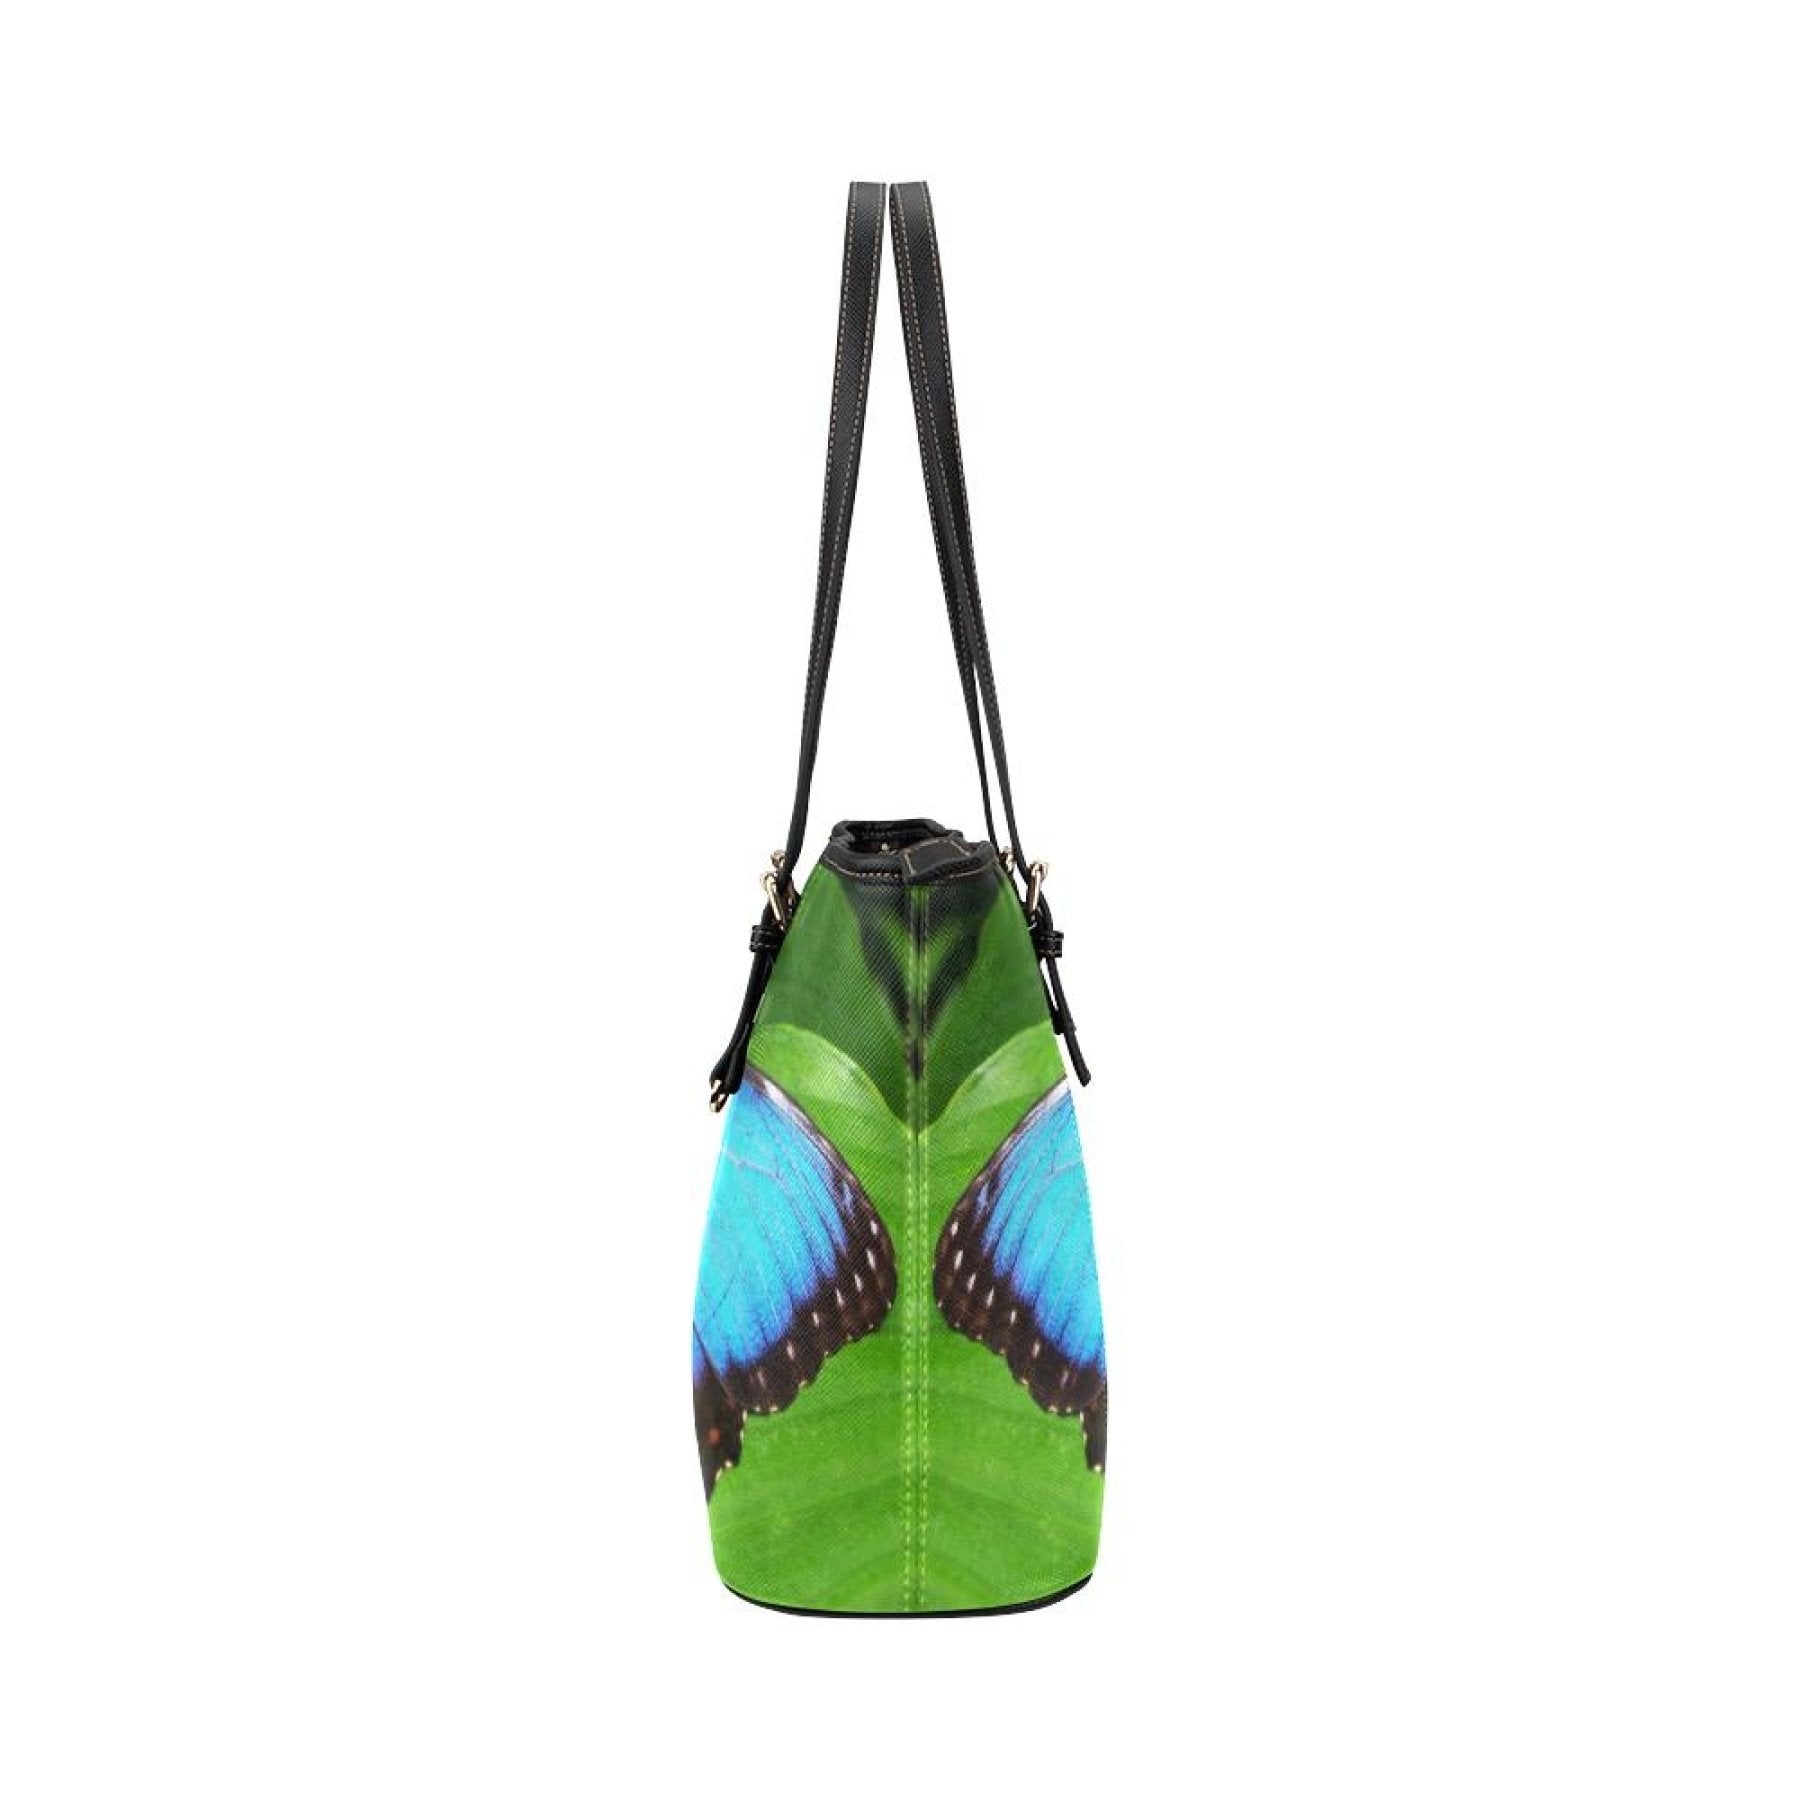 Tote Bag - Vibrant Blue Butterfly Print - Double Handle Large Bag Grey Coco